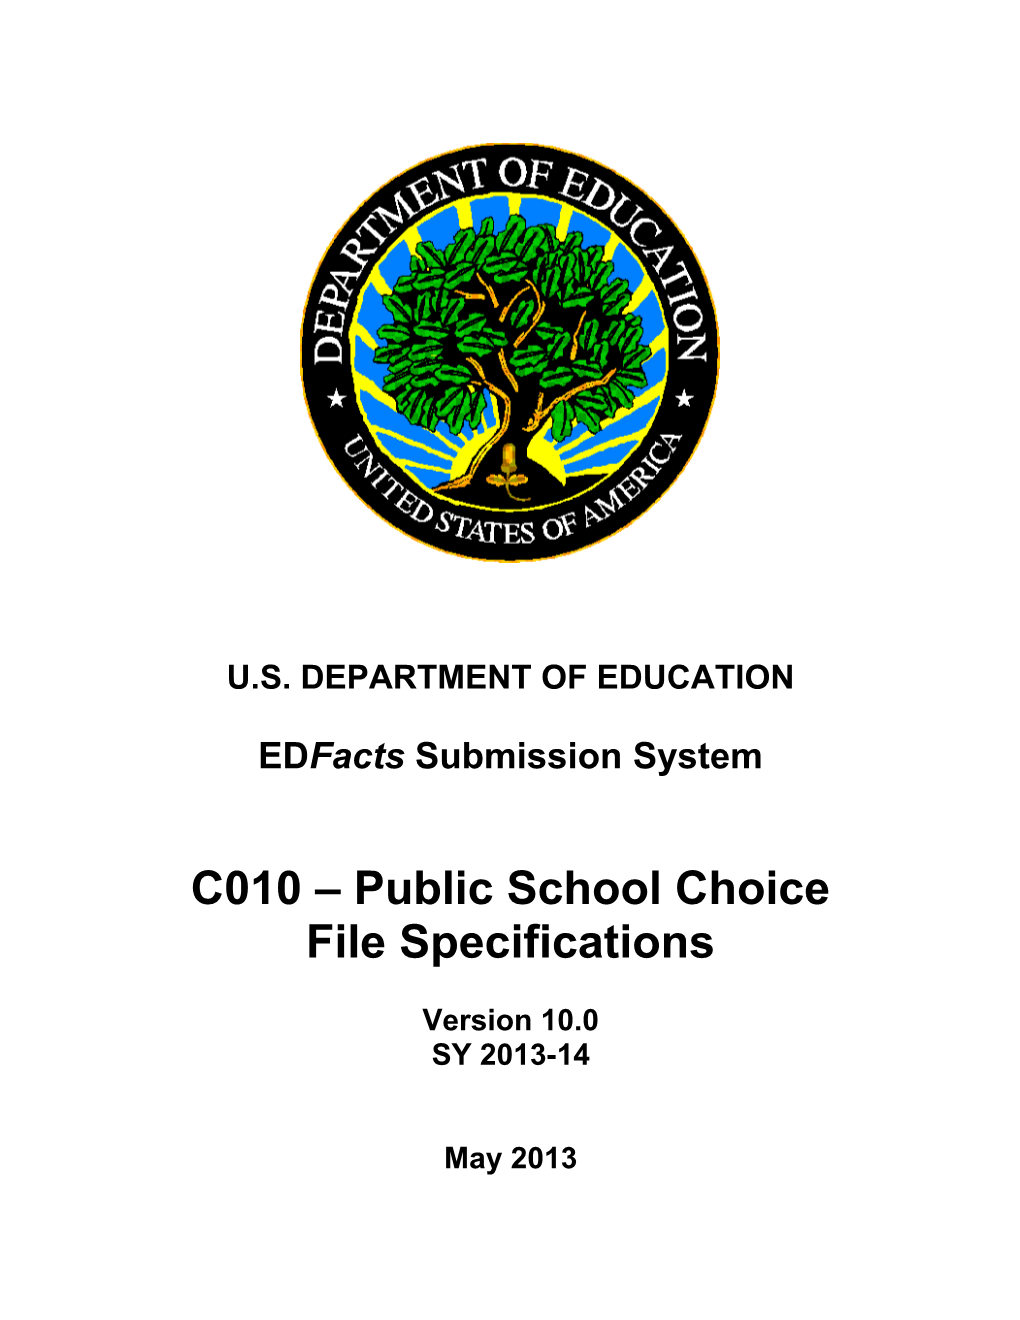 Public School Choice File Specifications